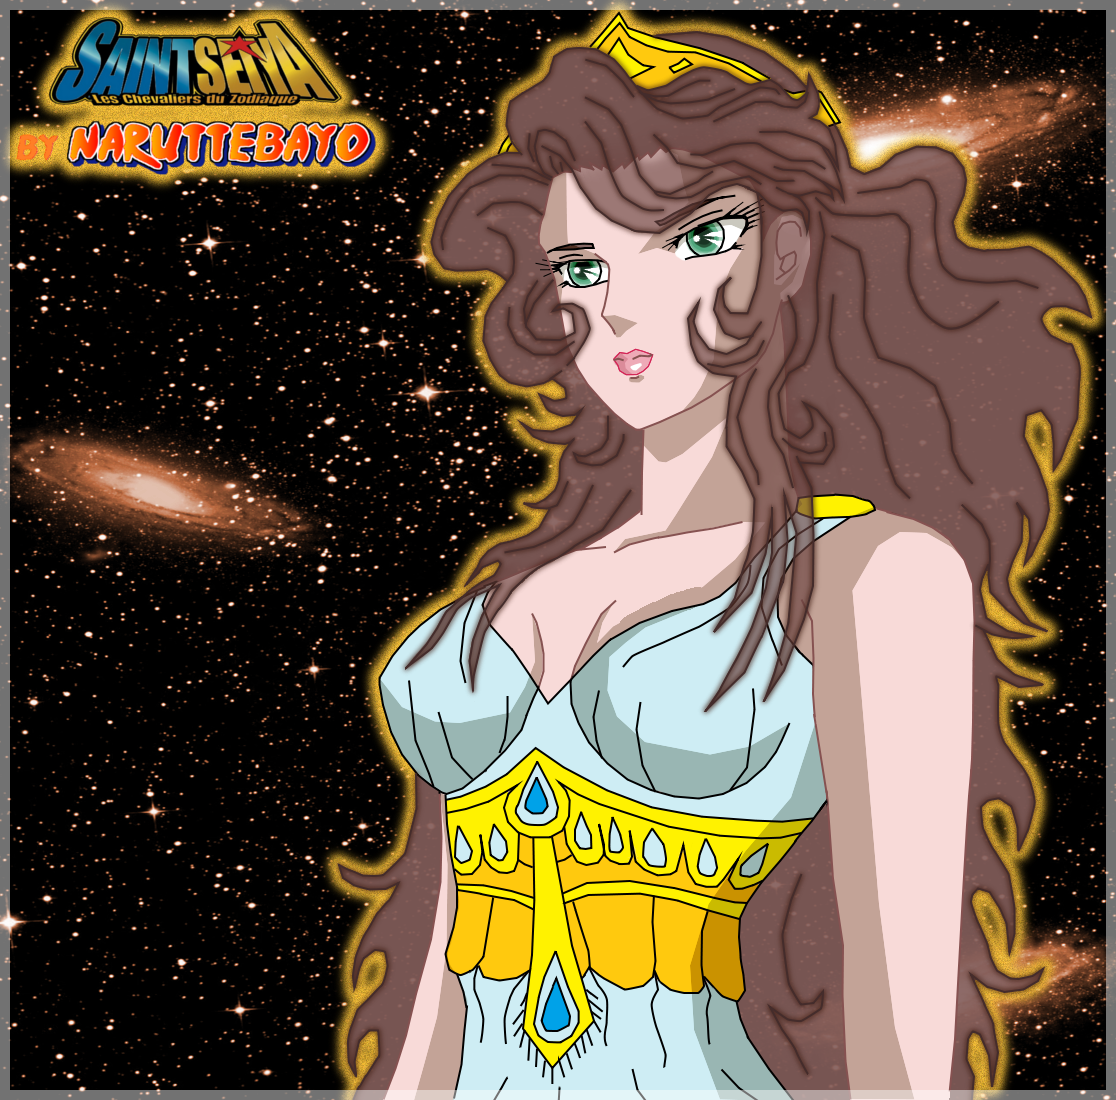 coloring buste hera by Narutto67 on DeviantArt